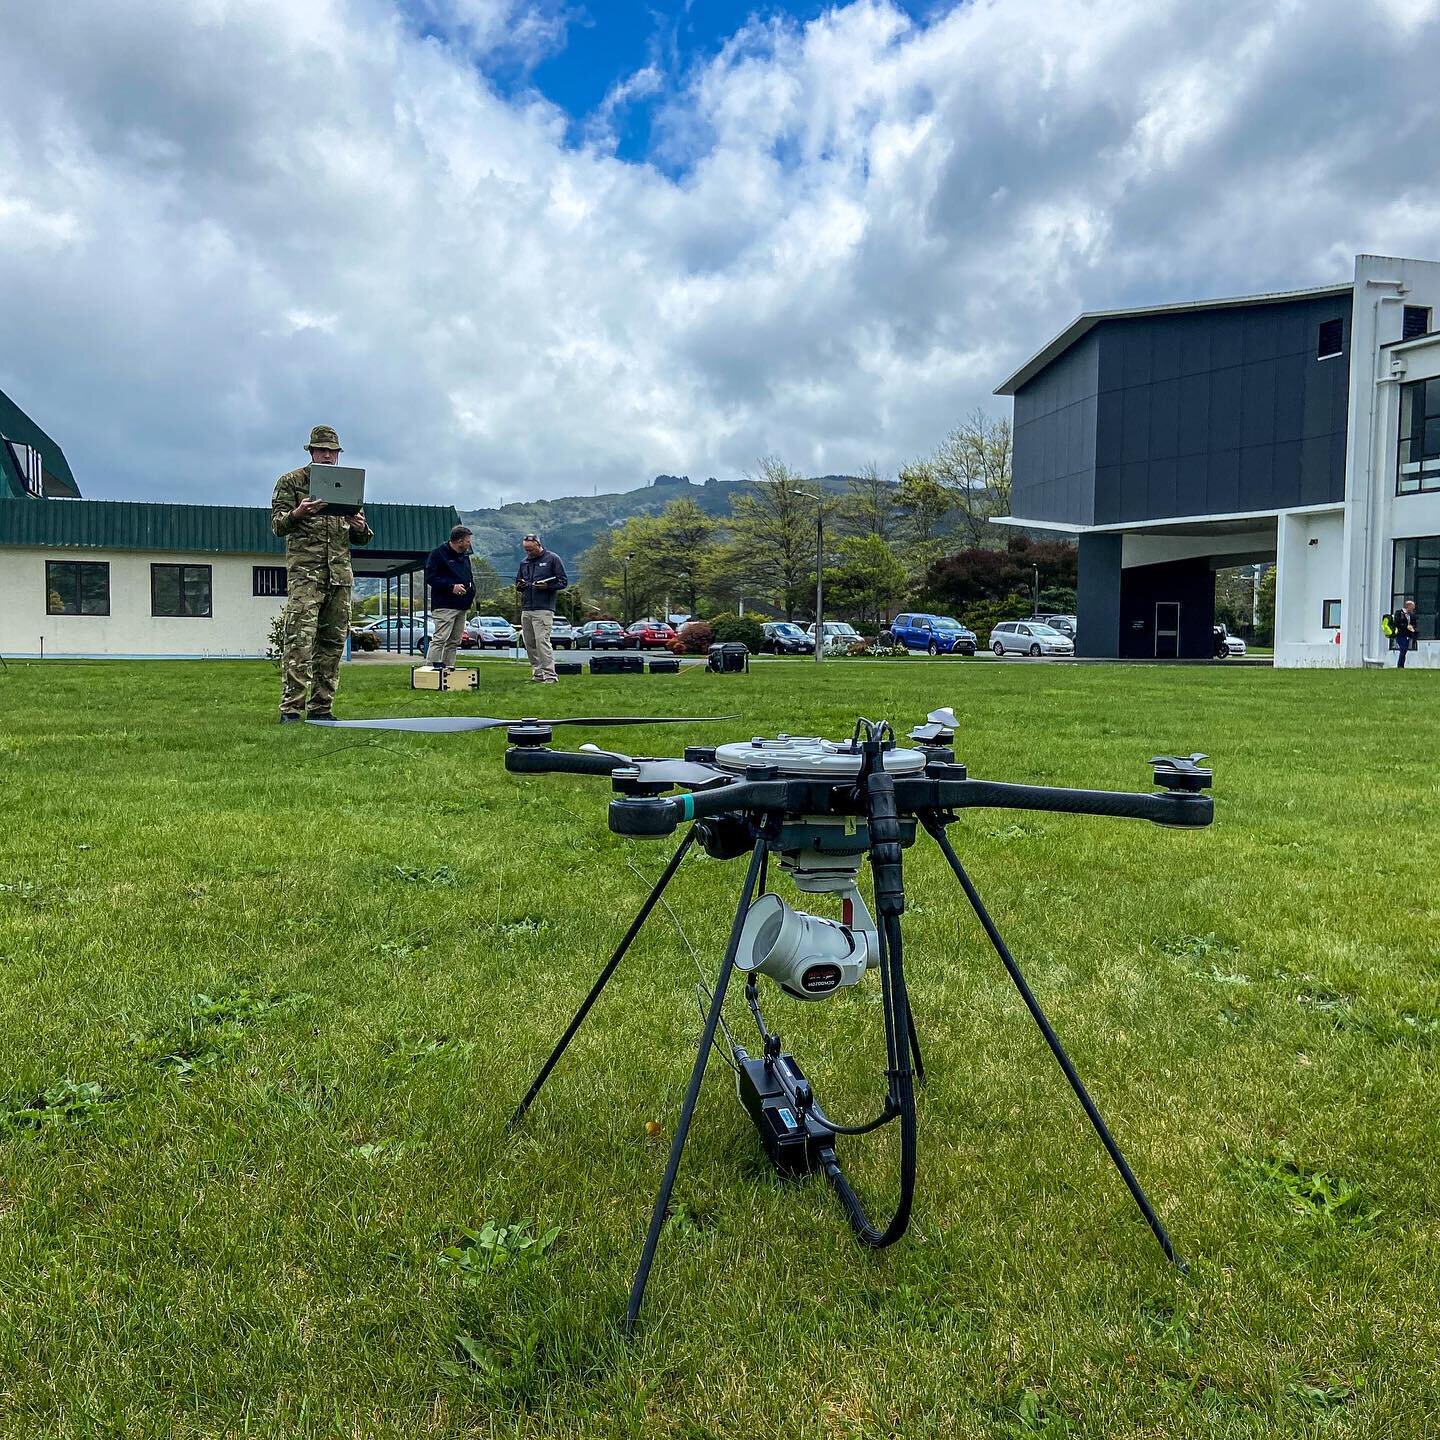 Great week last week with NZDF and @cratoslimited doing a bit of training and evaluation on the R70 tether and Strom Caster-L.

#dronesforgood #training #flir #drones #dronetechnology #nzdrones #cratos #inspire #dji #part102 #drone #rpas #dronelife #